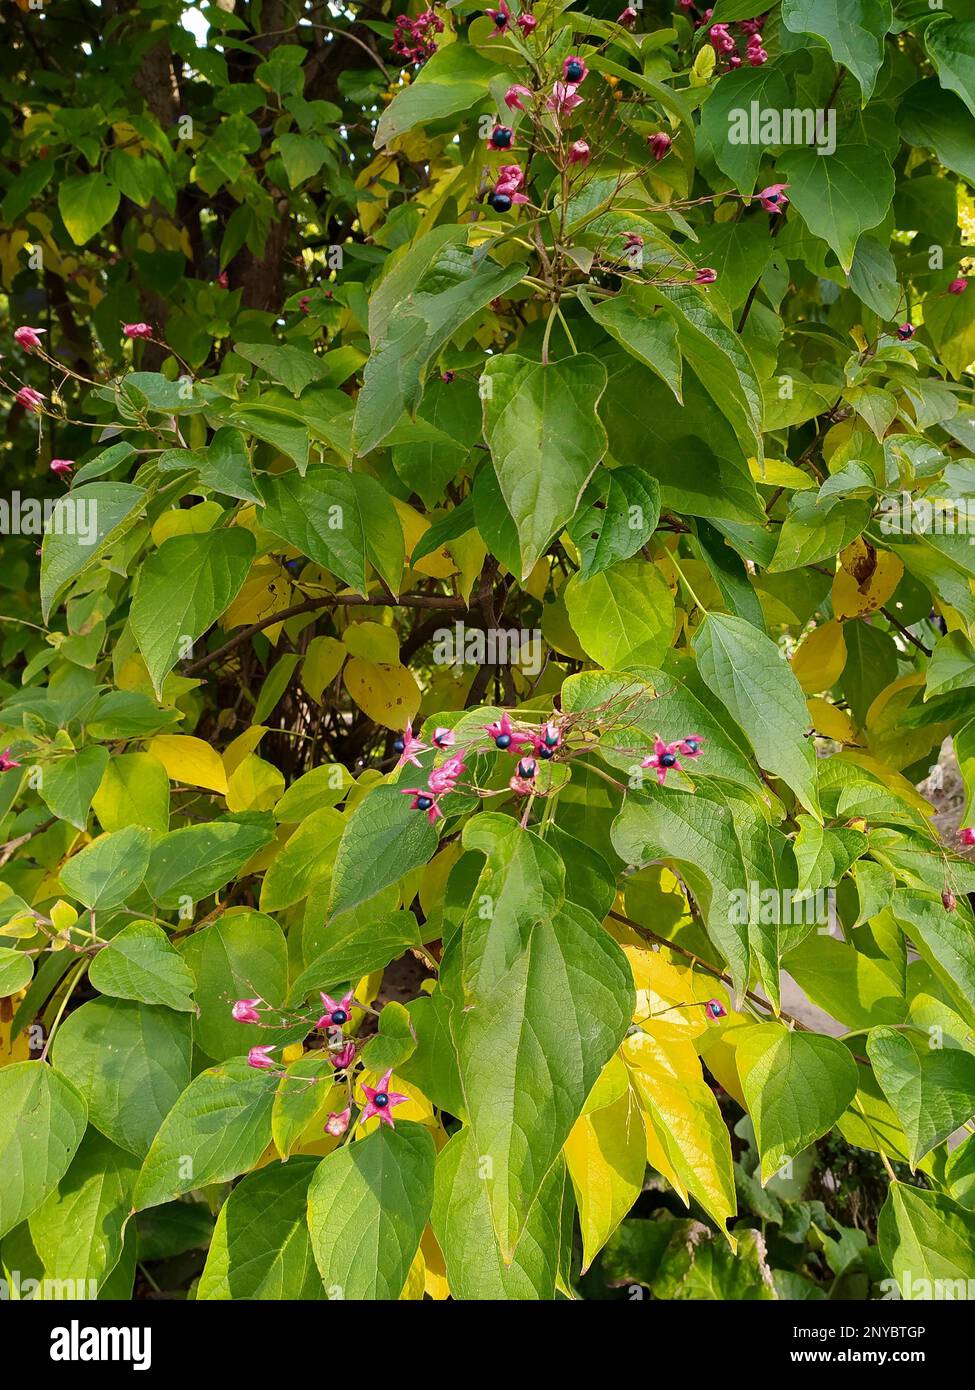 Glorybower (Clerodendrum trichotomum) is a deciduous shrub native to east Asia. Fruits. Stock Photo